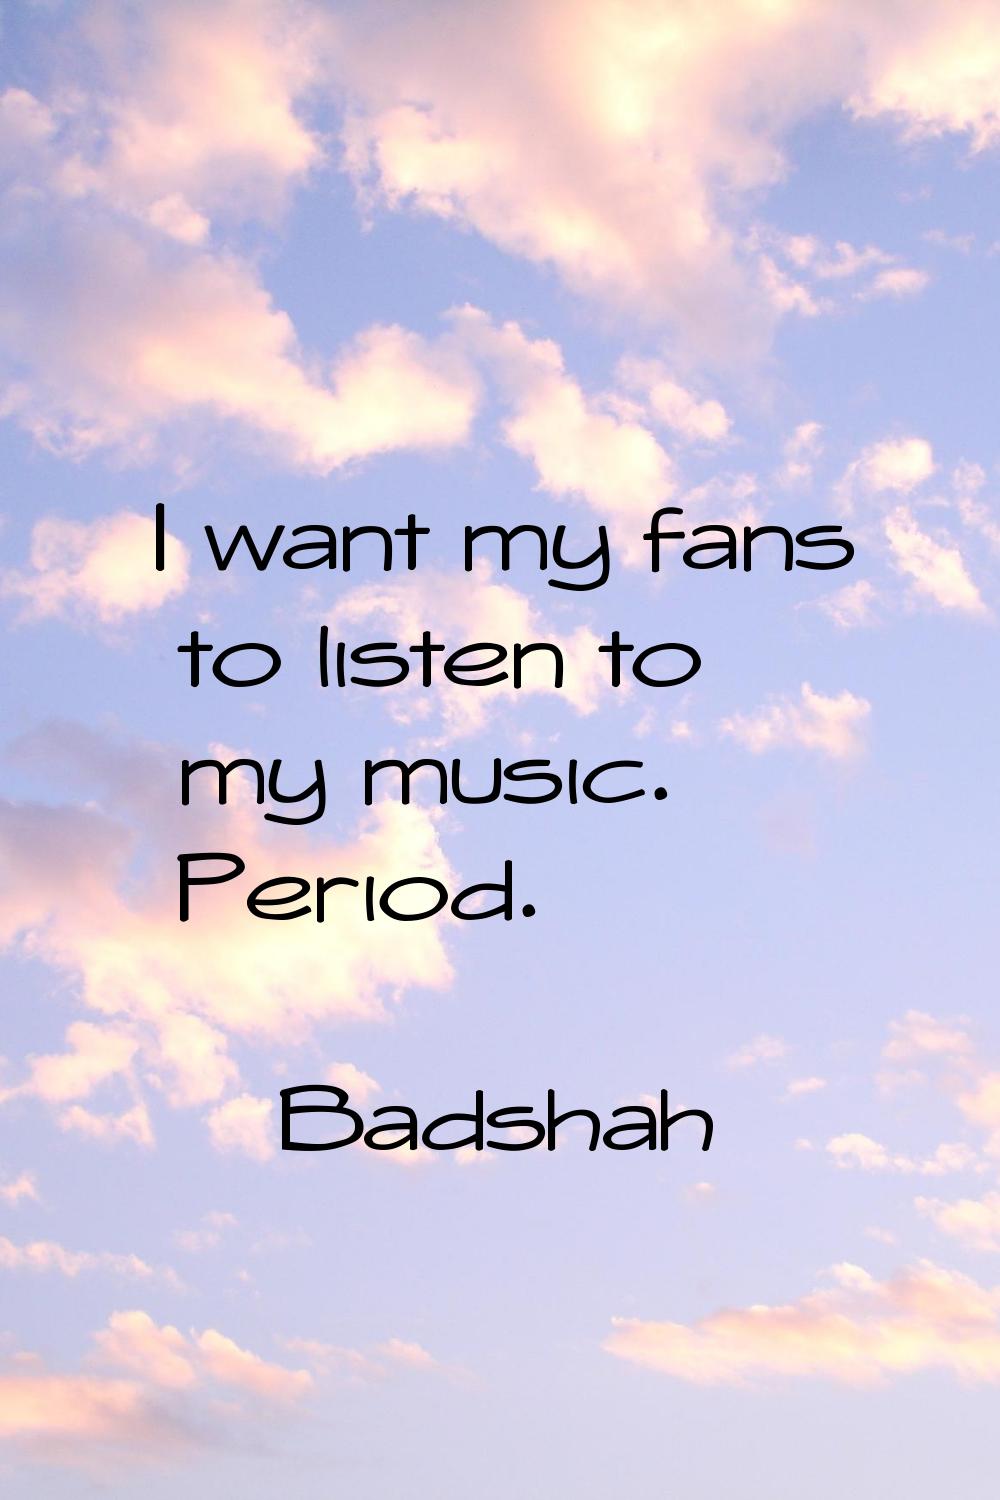 I want my fans to listen to my music. Period.